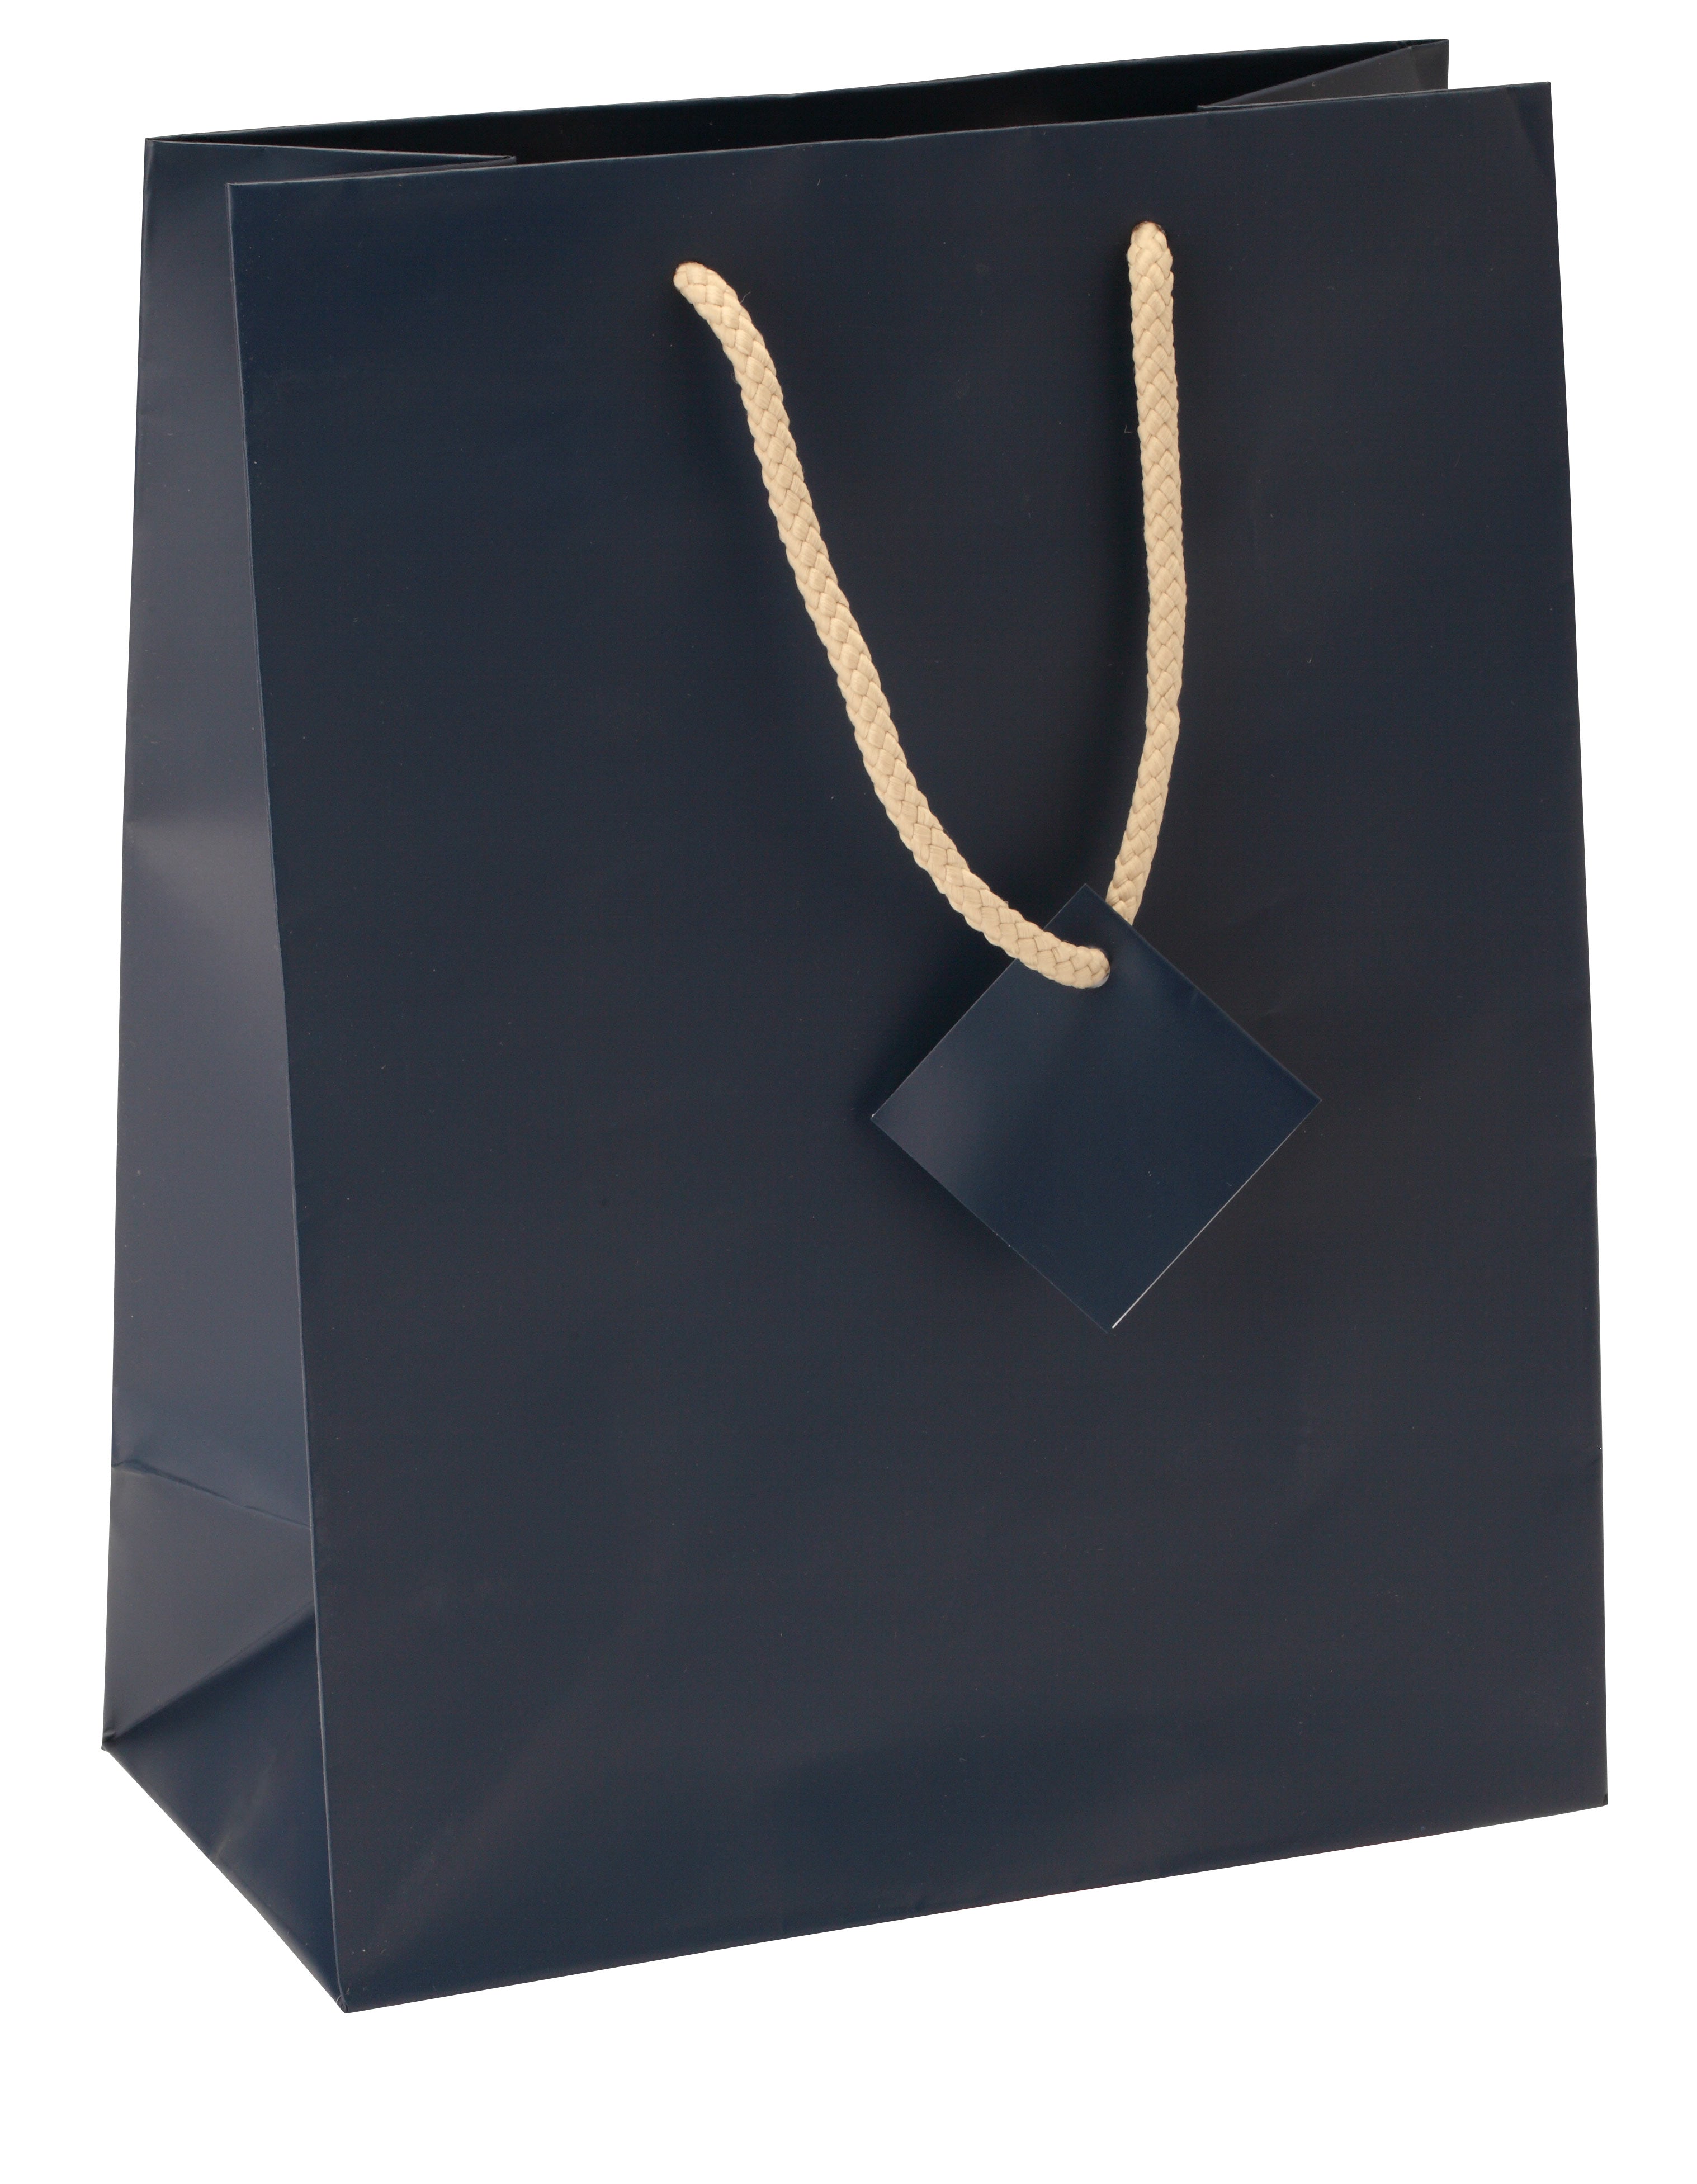 Satin-Finish Tote-Style Gift Bags in Midnight Blue w/Khaki Drawstring